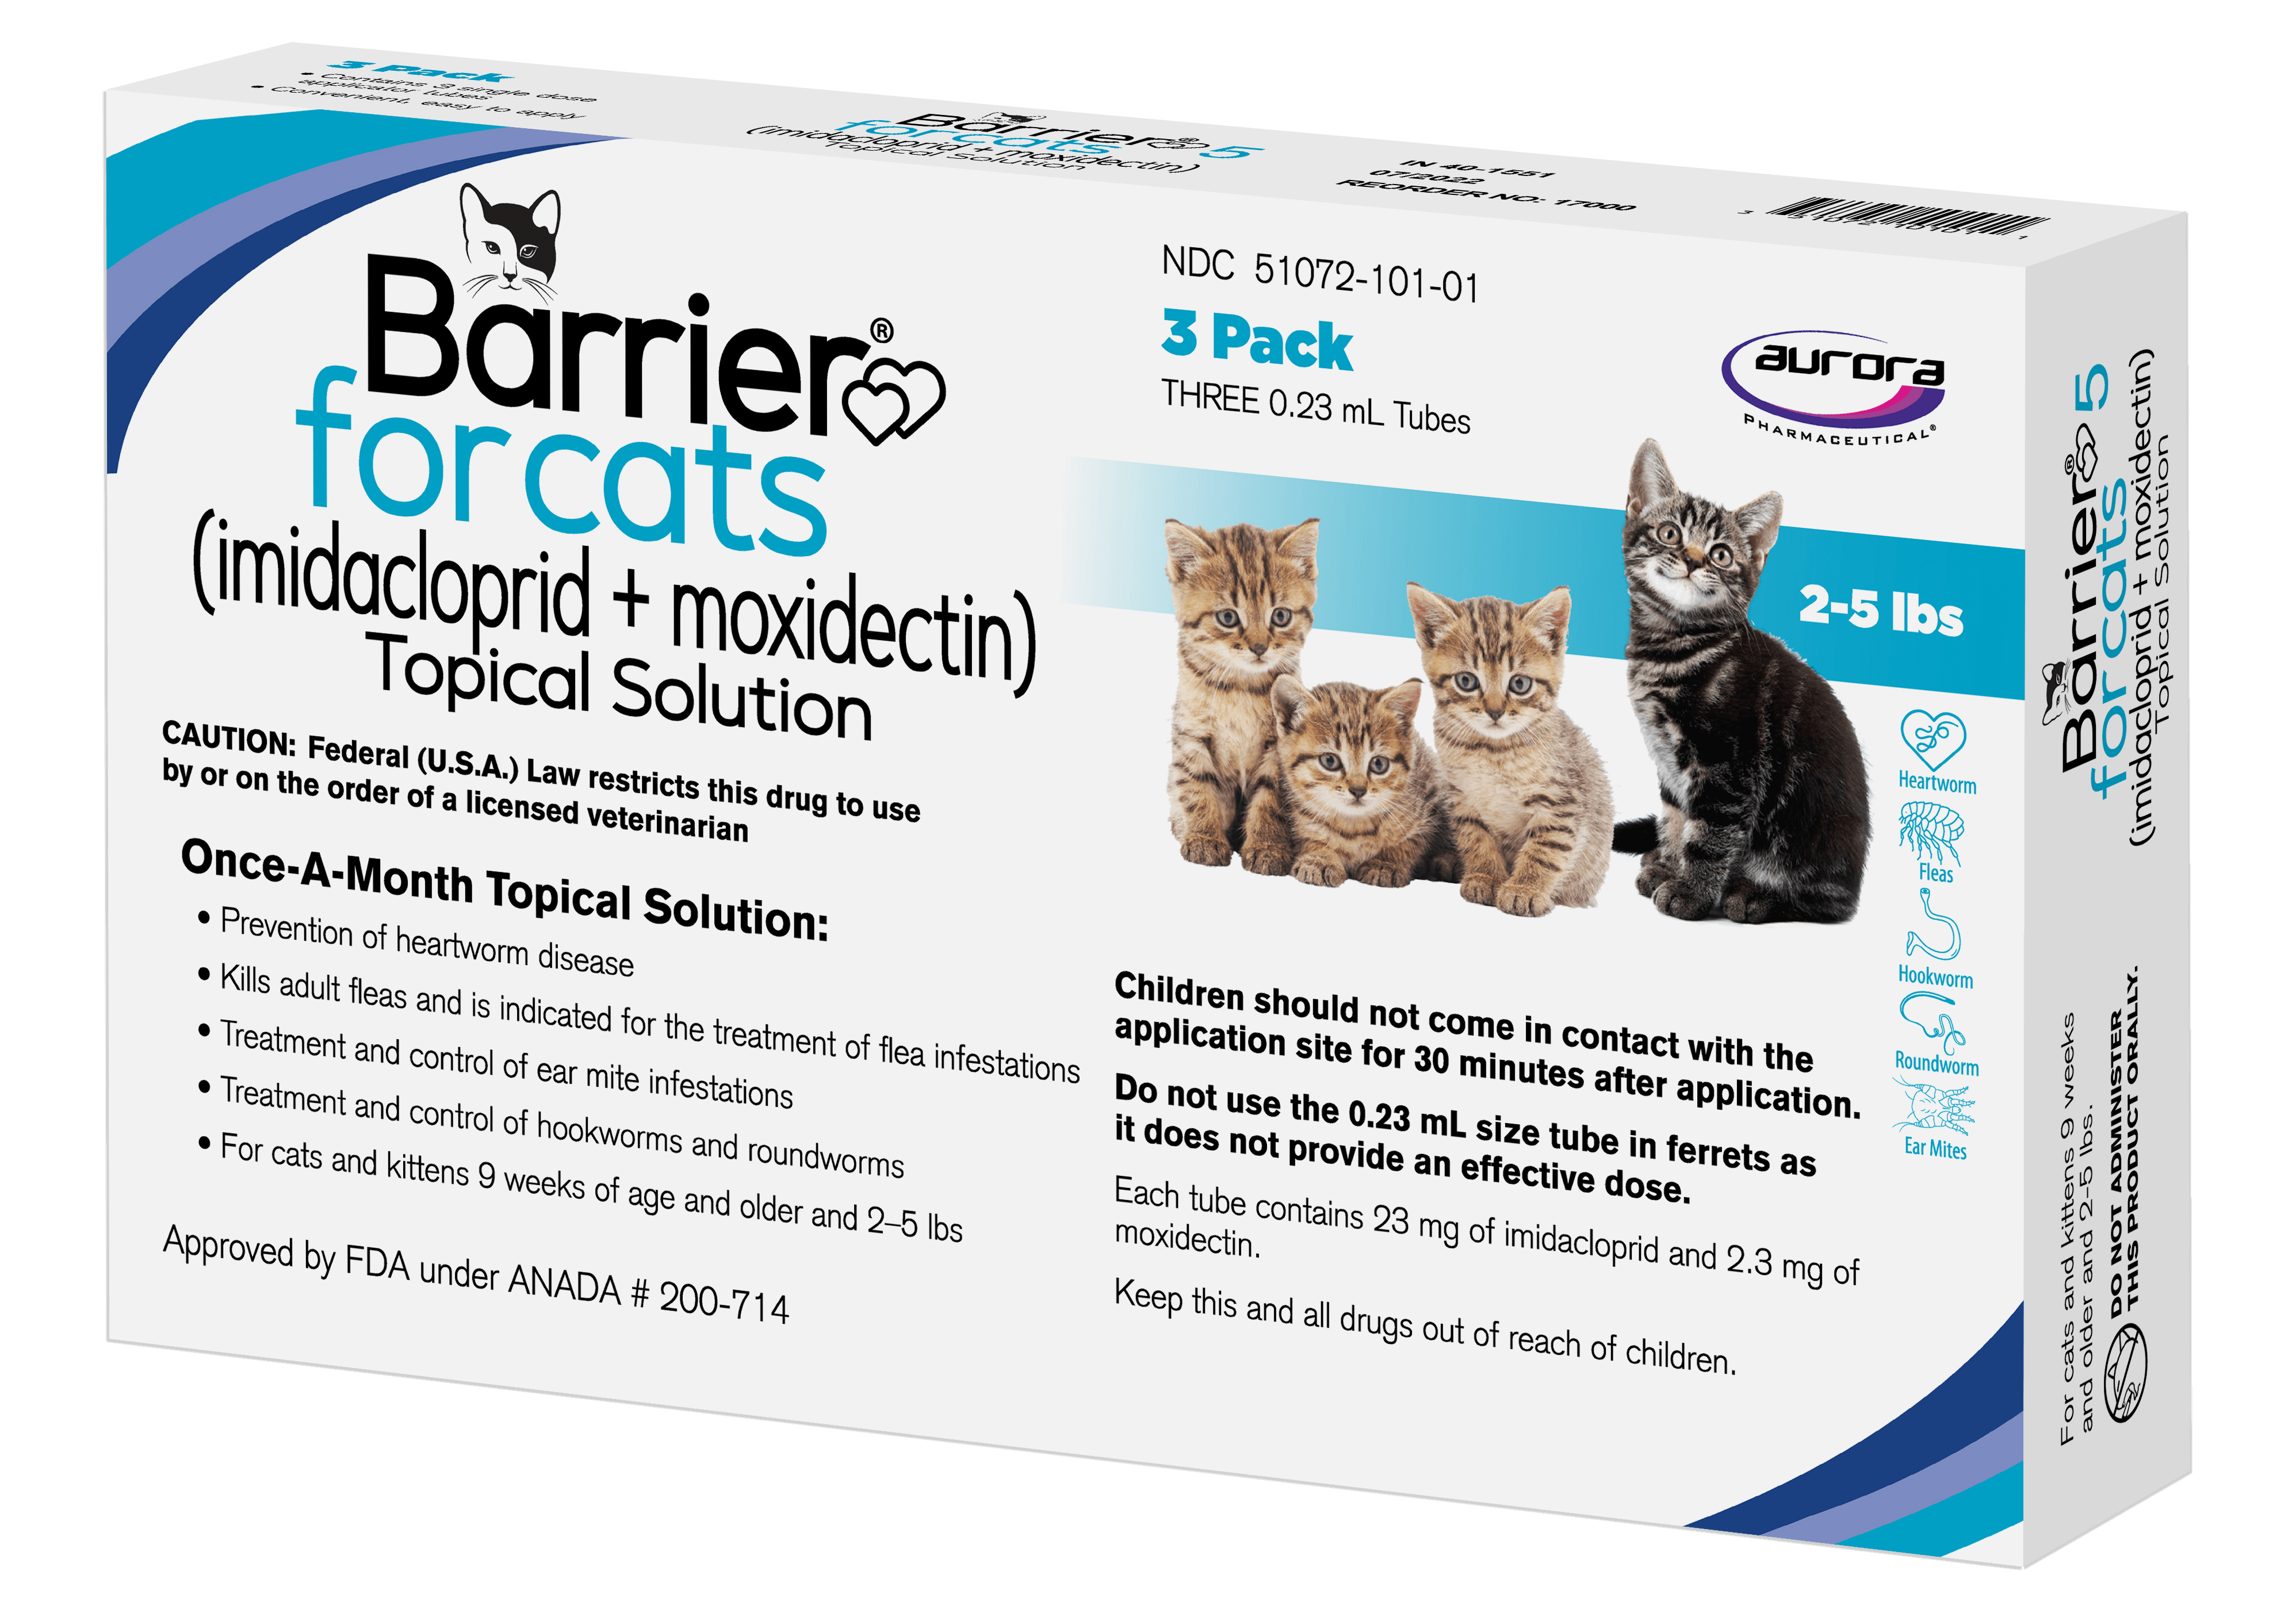 barrier-for-cats-2-5-lbs-png.png